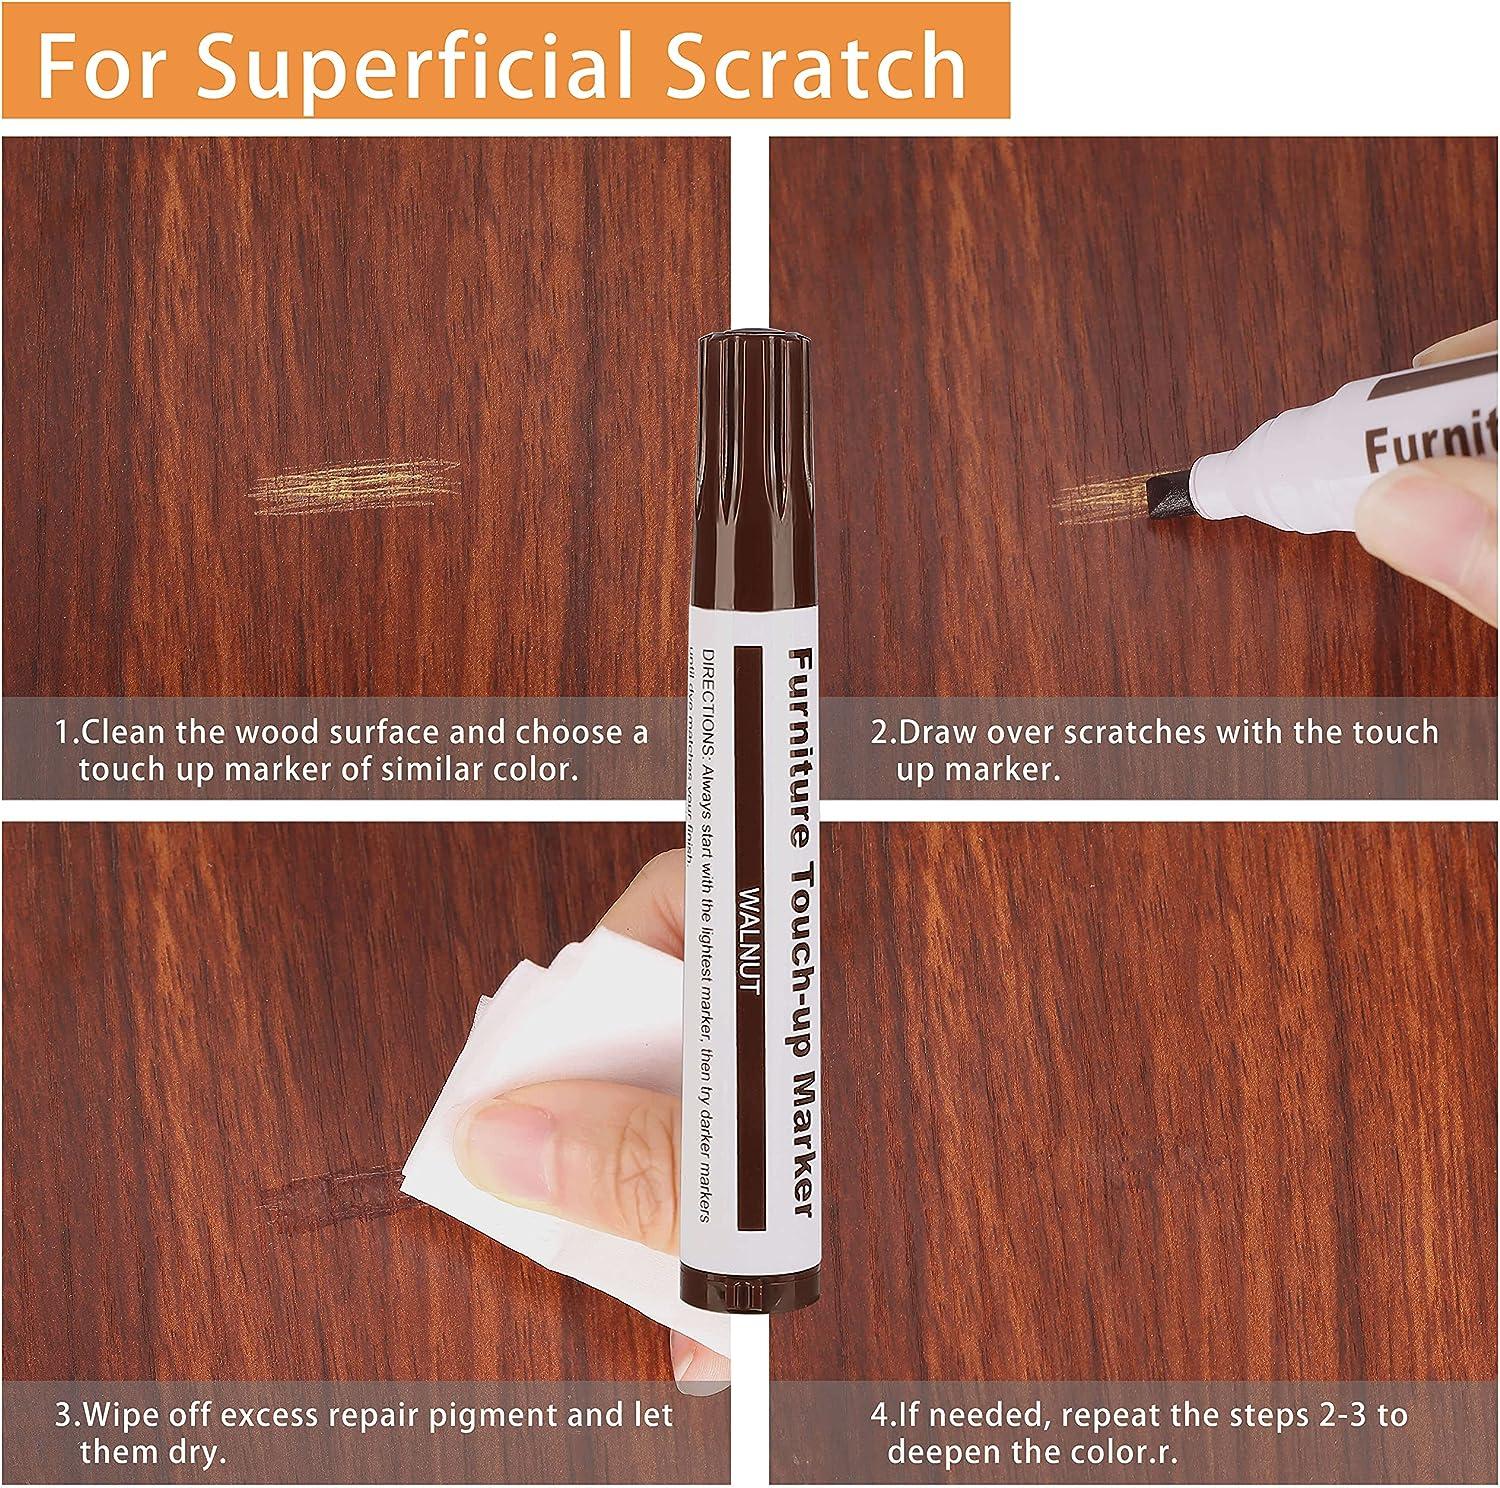 Furniture Markers Touch Up, Lifreer 21 Pcs Wood Filler Floor Scratch Repair  Kits, Wood Markers and Wax Sticks with Sharpener Kit for Funiture